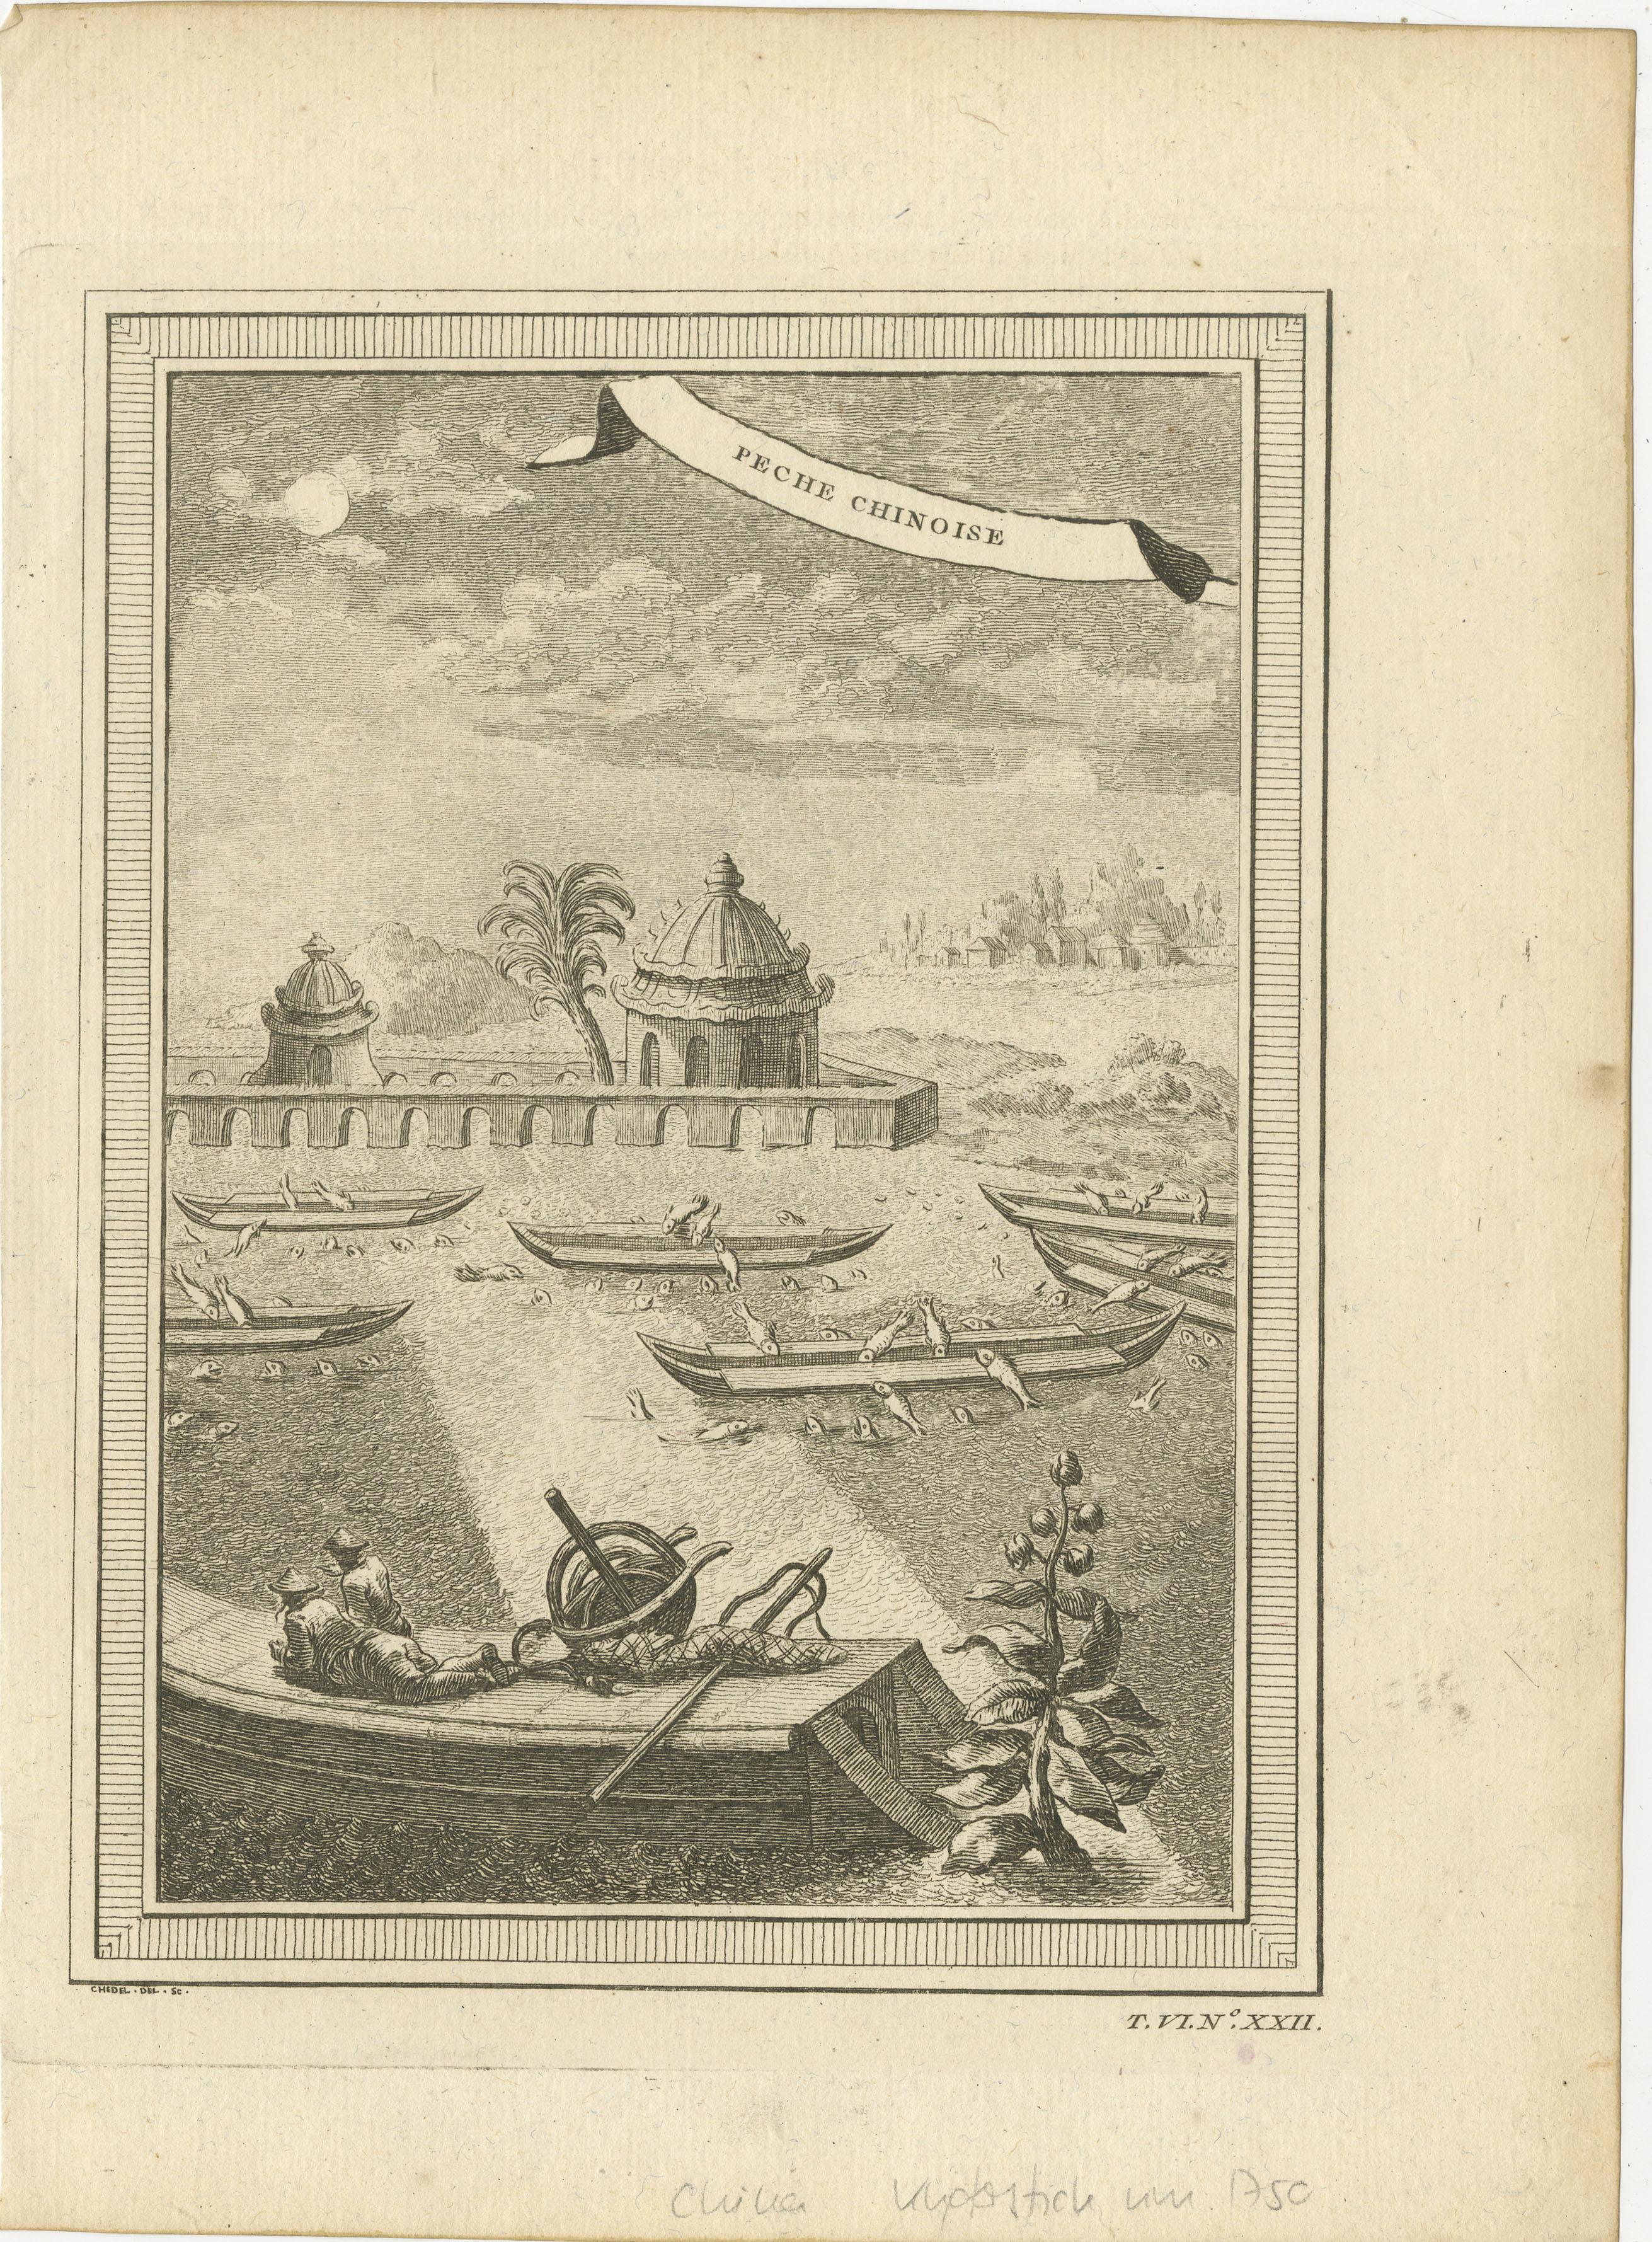 Antique print titled 'Peche Chinoise'. The plate depicts a pair of fishermen resting beside their nets on a stone pier at the edge of a large sea enclosure. The enclosure is teeming with fish, which jump over and around the empty narrow fishing